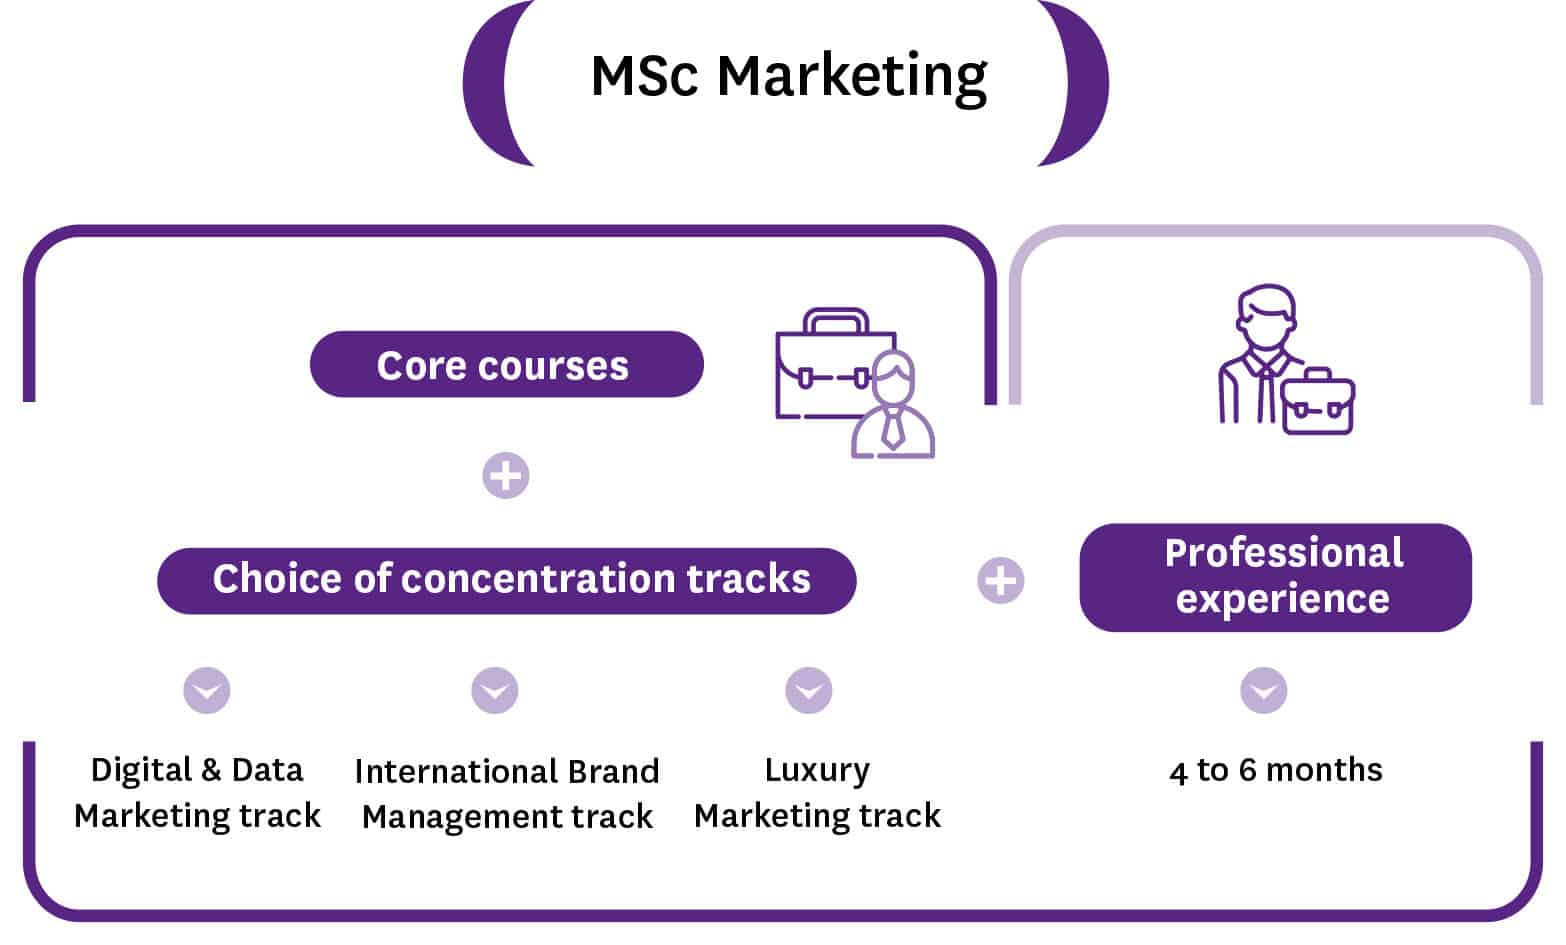 What is the difference between MA and MSc digital marketing?